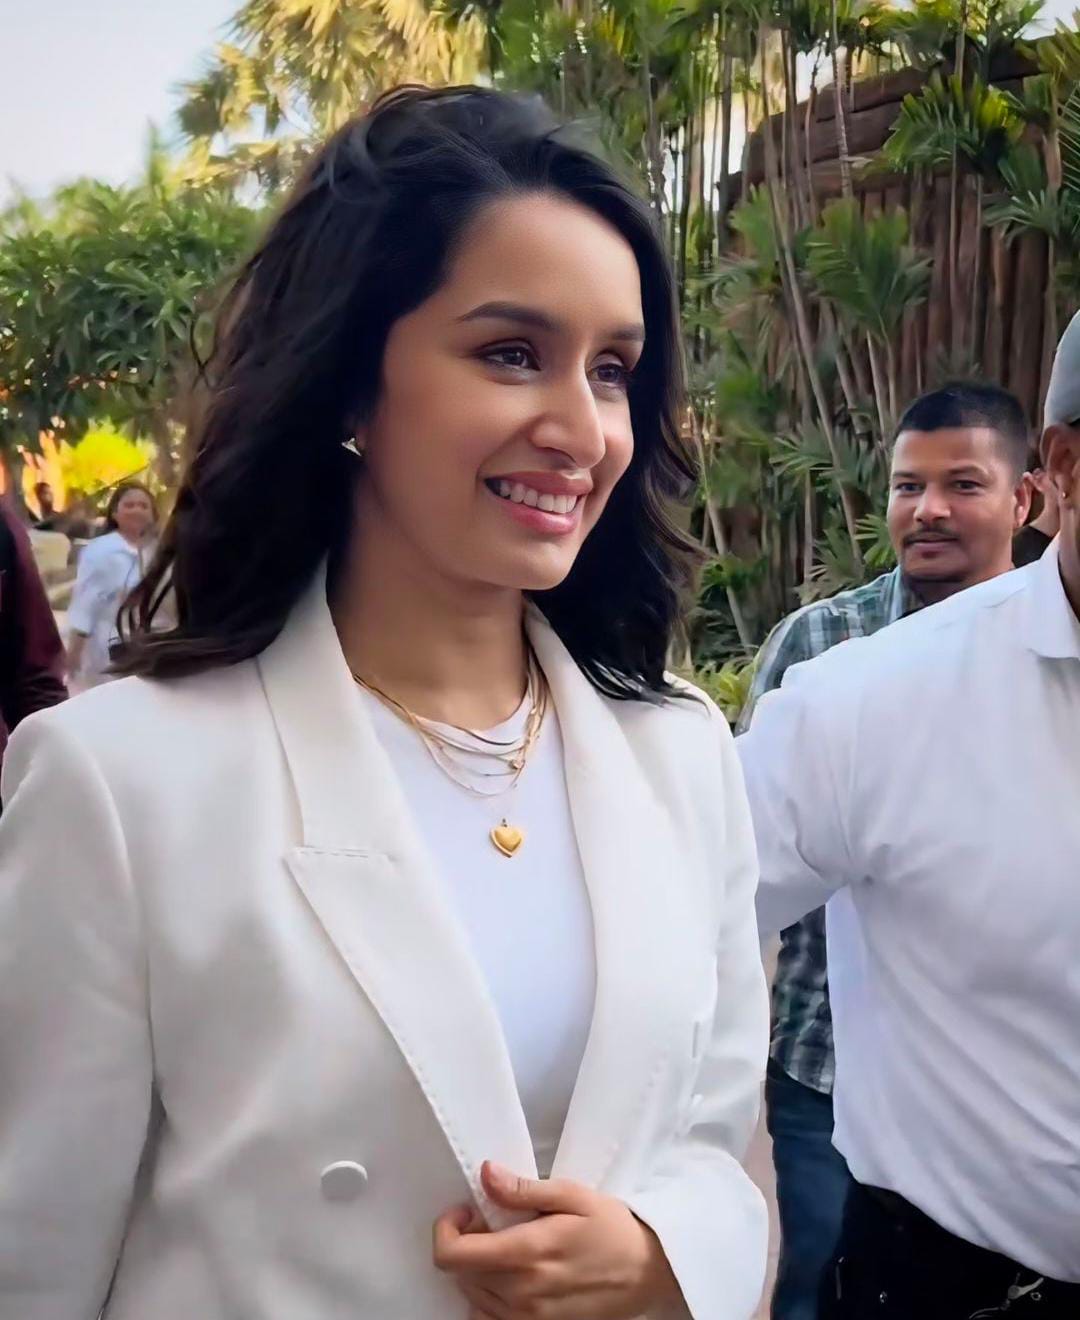 Shraddha Kapoor joins Pune-based jewelry startup Palmonas as co-founder